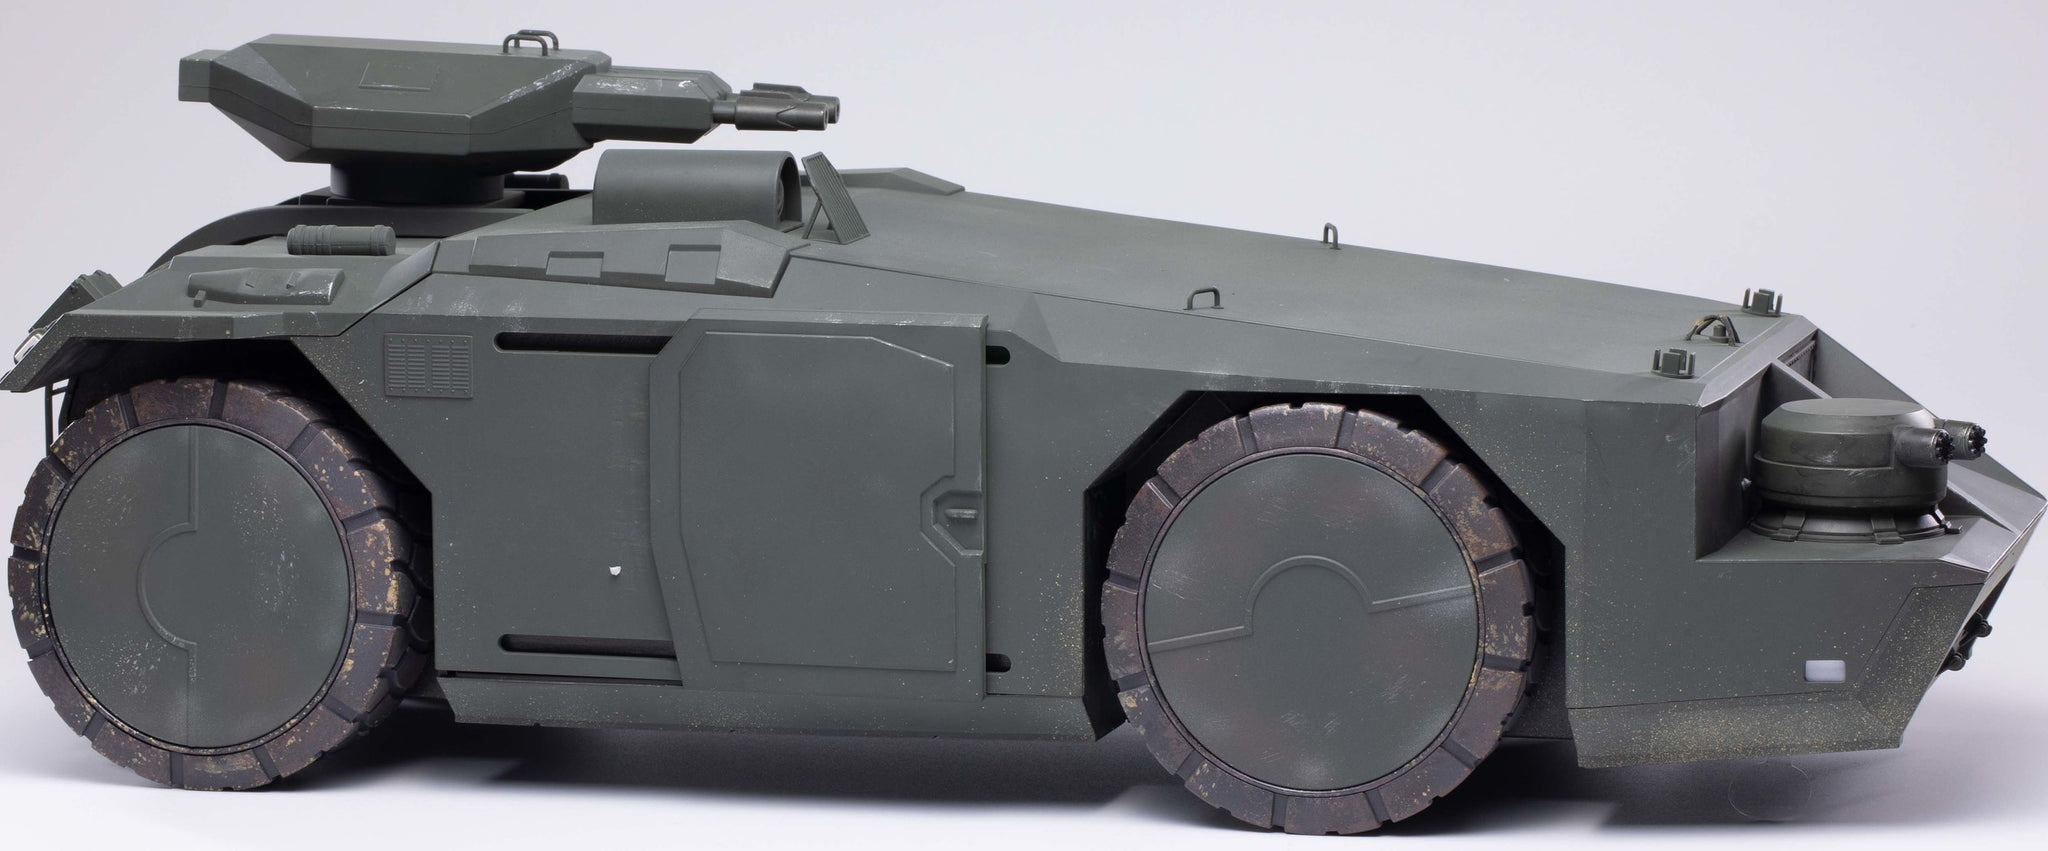 HIYA ALIENS ARMORED PERSONNEL CARRIER GREEN VERSION 1/18 SCALE